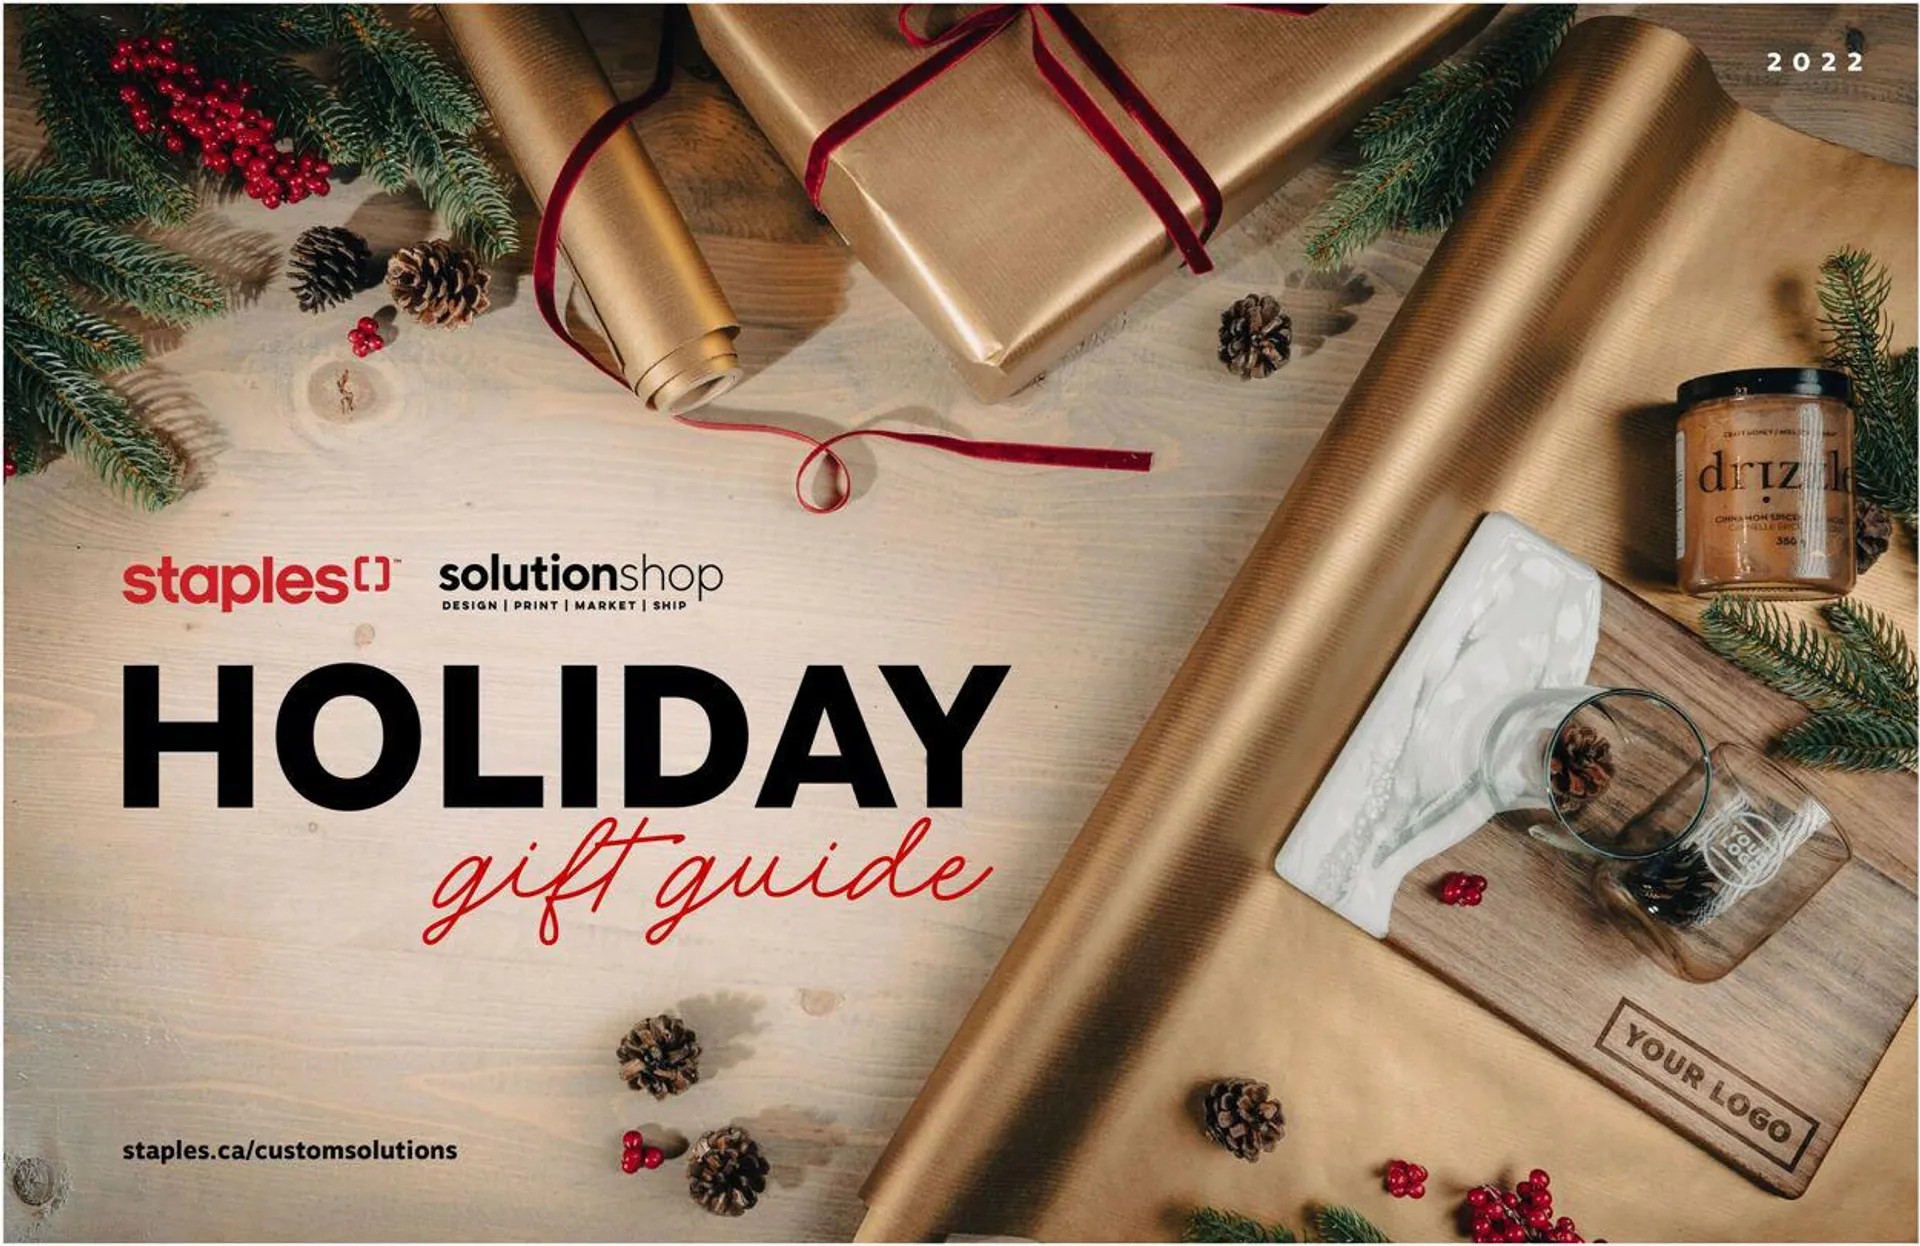 Staples HOLIDAY 2022 Current flyer - 1